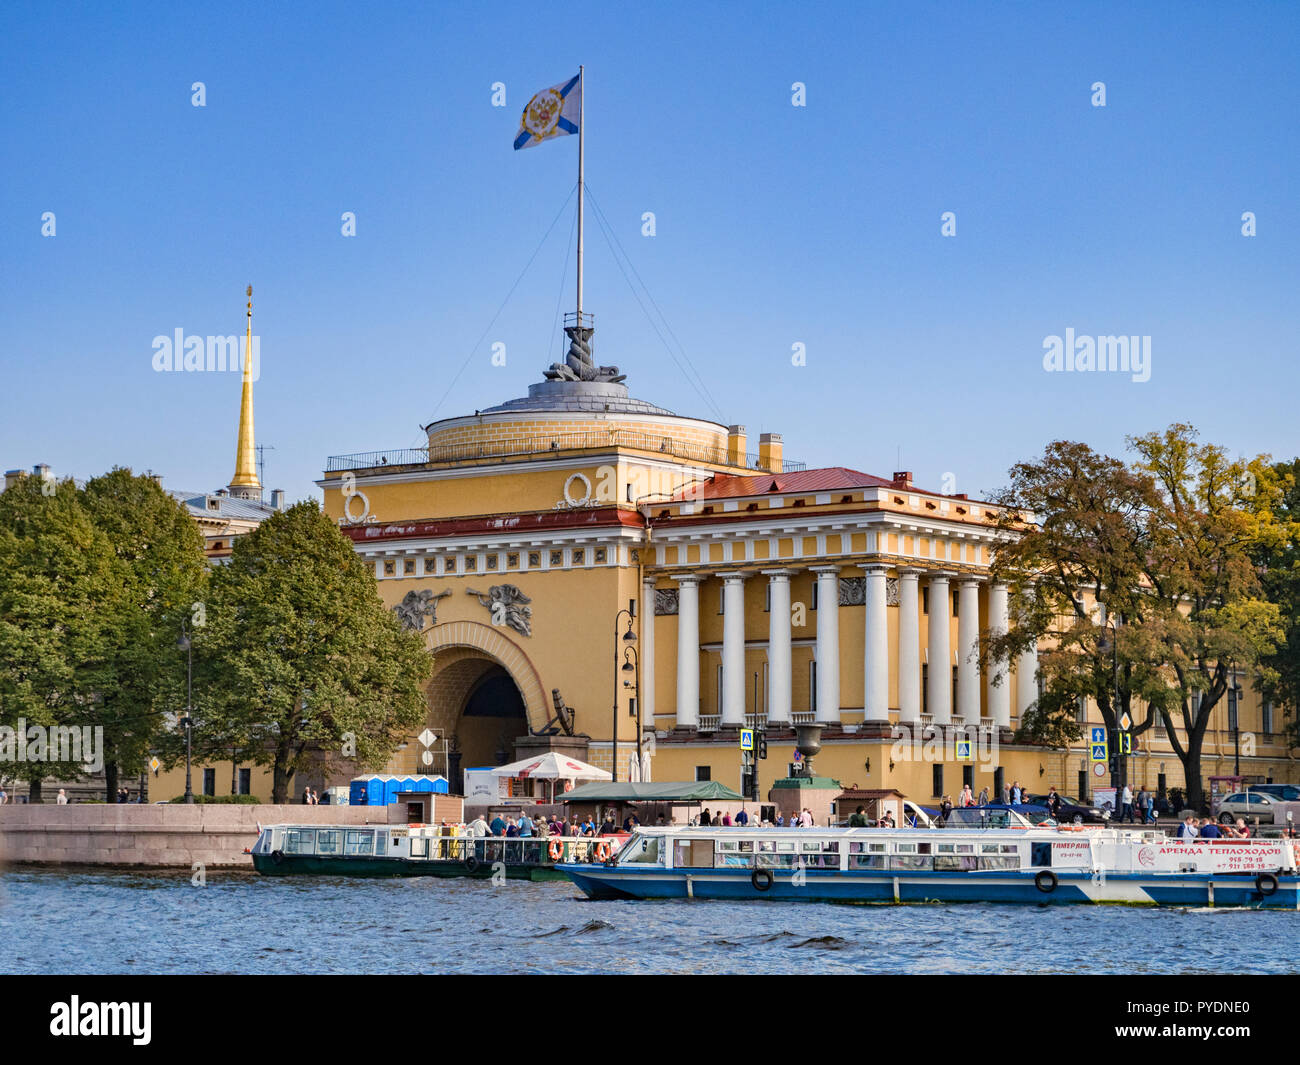 19 September 2018: St Petersburg, Russia - The Admiralty, headquarters of the Russian Navy, on the Neva Embankment on a sunny autumn day with clear bl Stock Photo